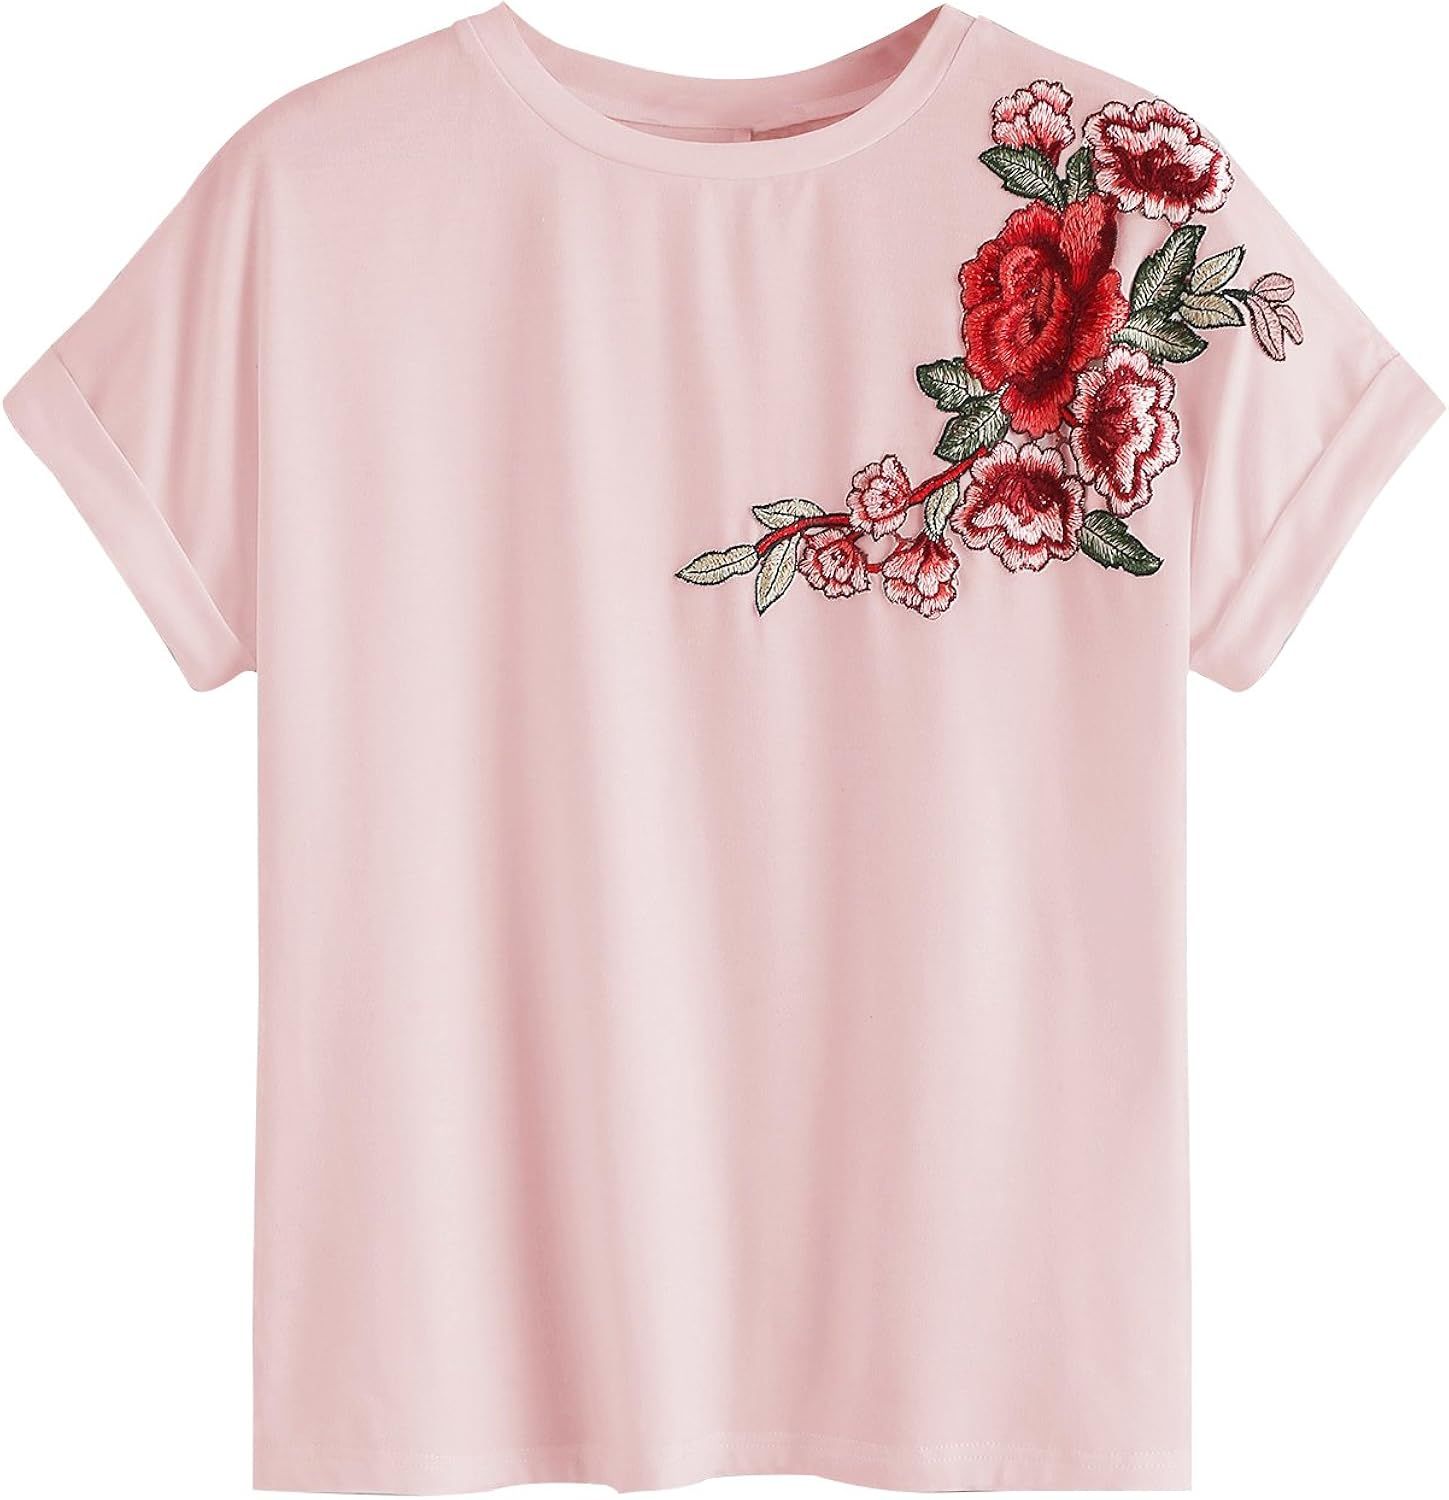 Romwe Women's Floral Embroidery Cuffed Short Sleeve Casual Tees T-Shirt Tops | Amazon (US)